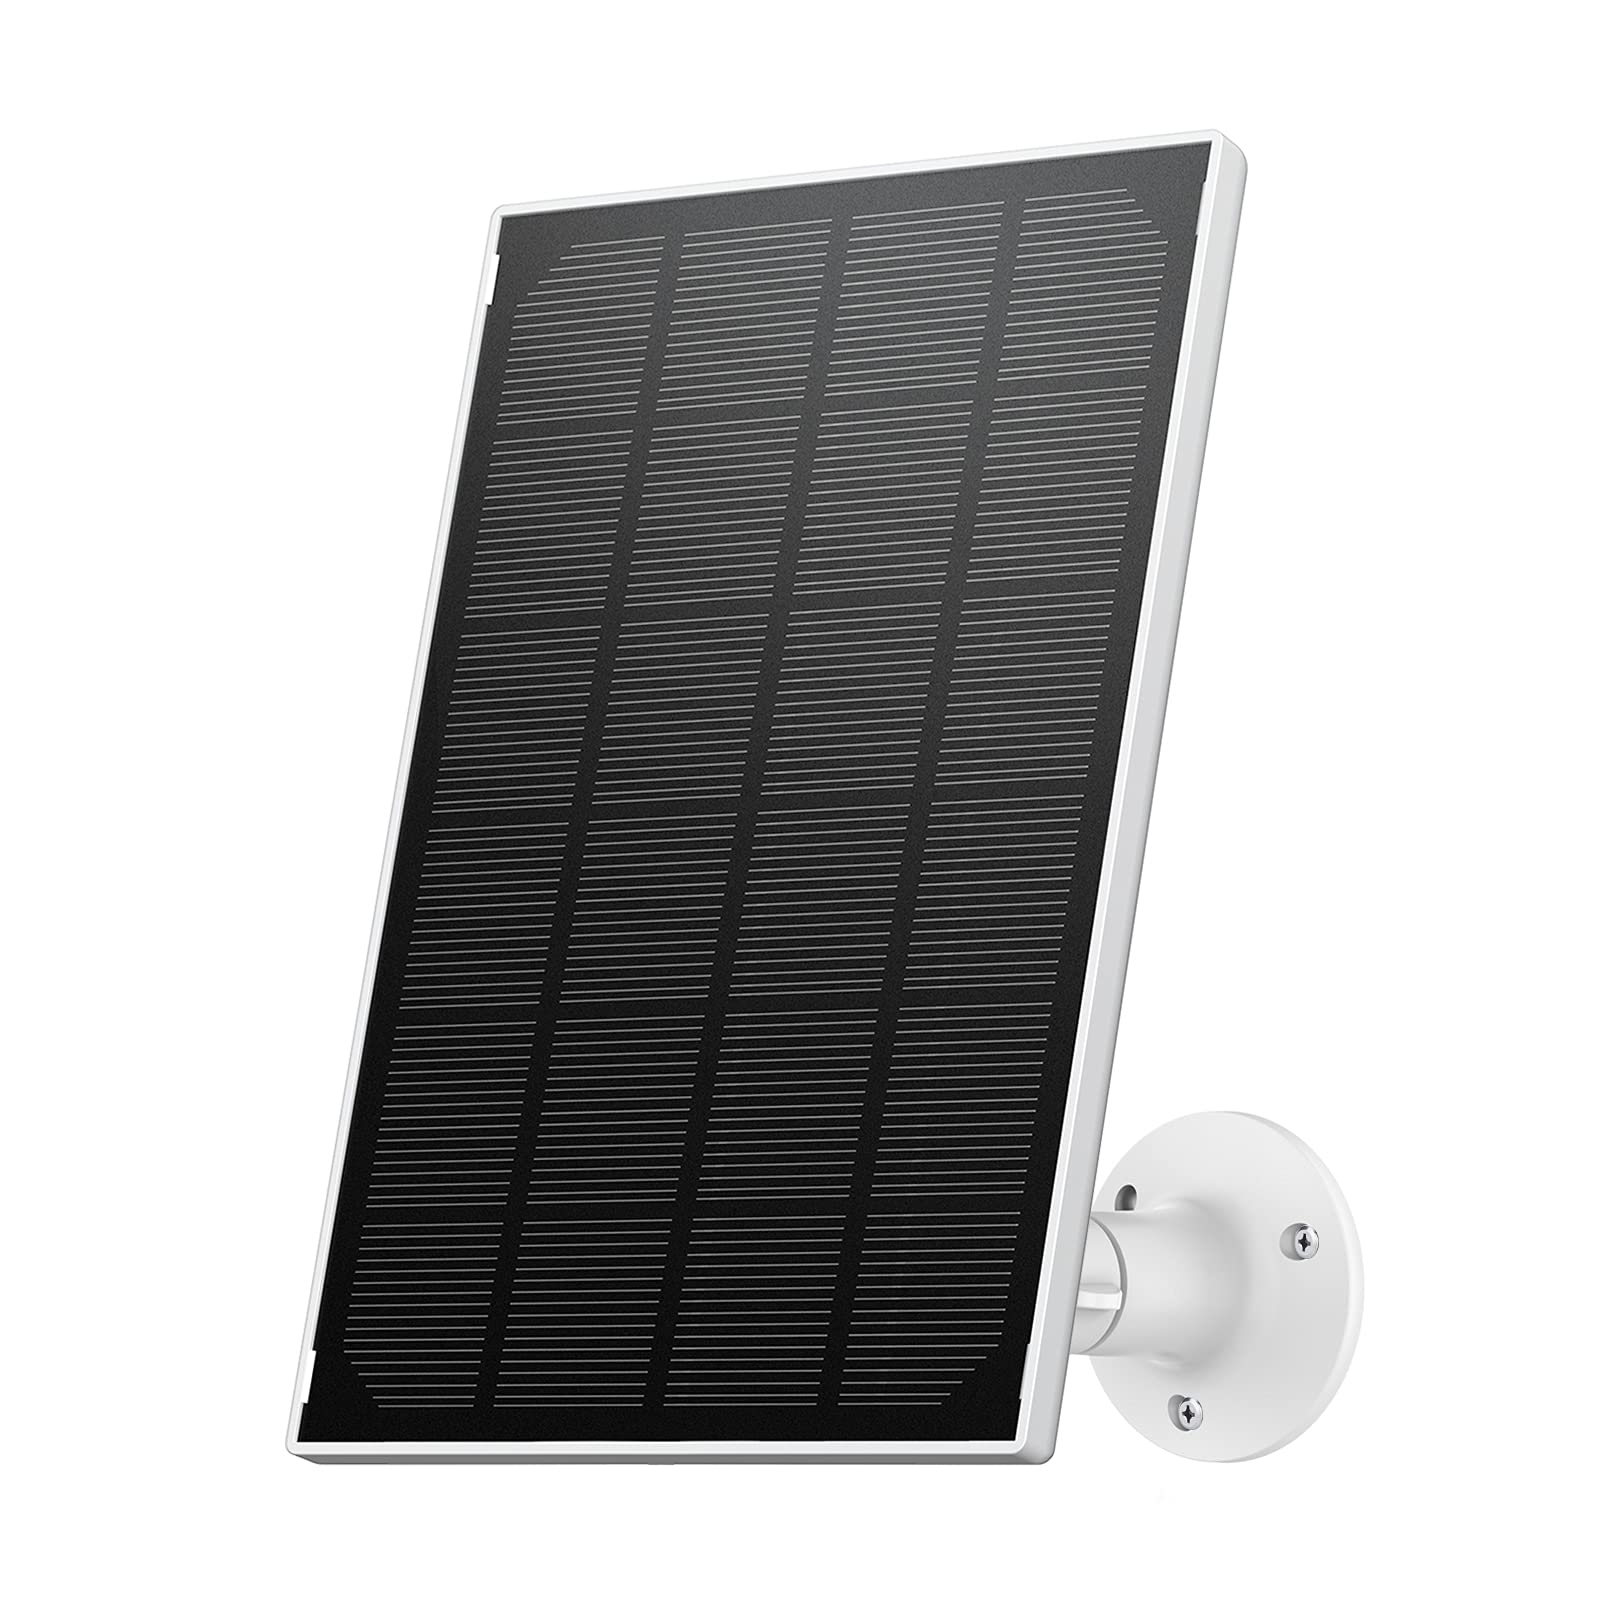 Book Cover Solar Panel for Wireless Camera ZUMIMALL F5/X1, IP66 Waterproof Solar Panel with 10ft Charge Cable, Suitable for All Security Camera with Micro USB Port